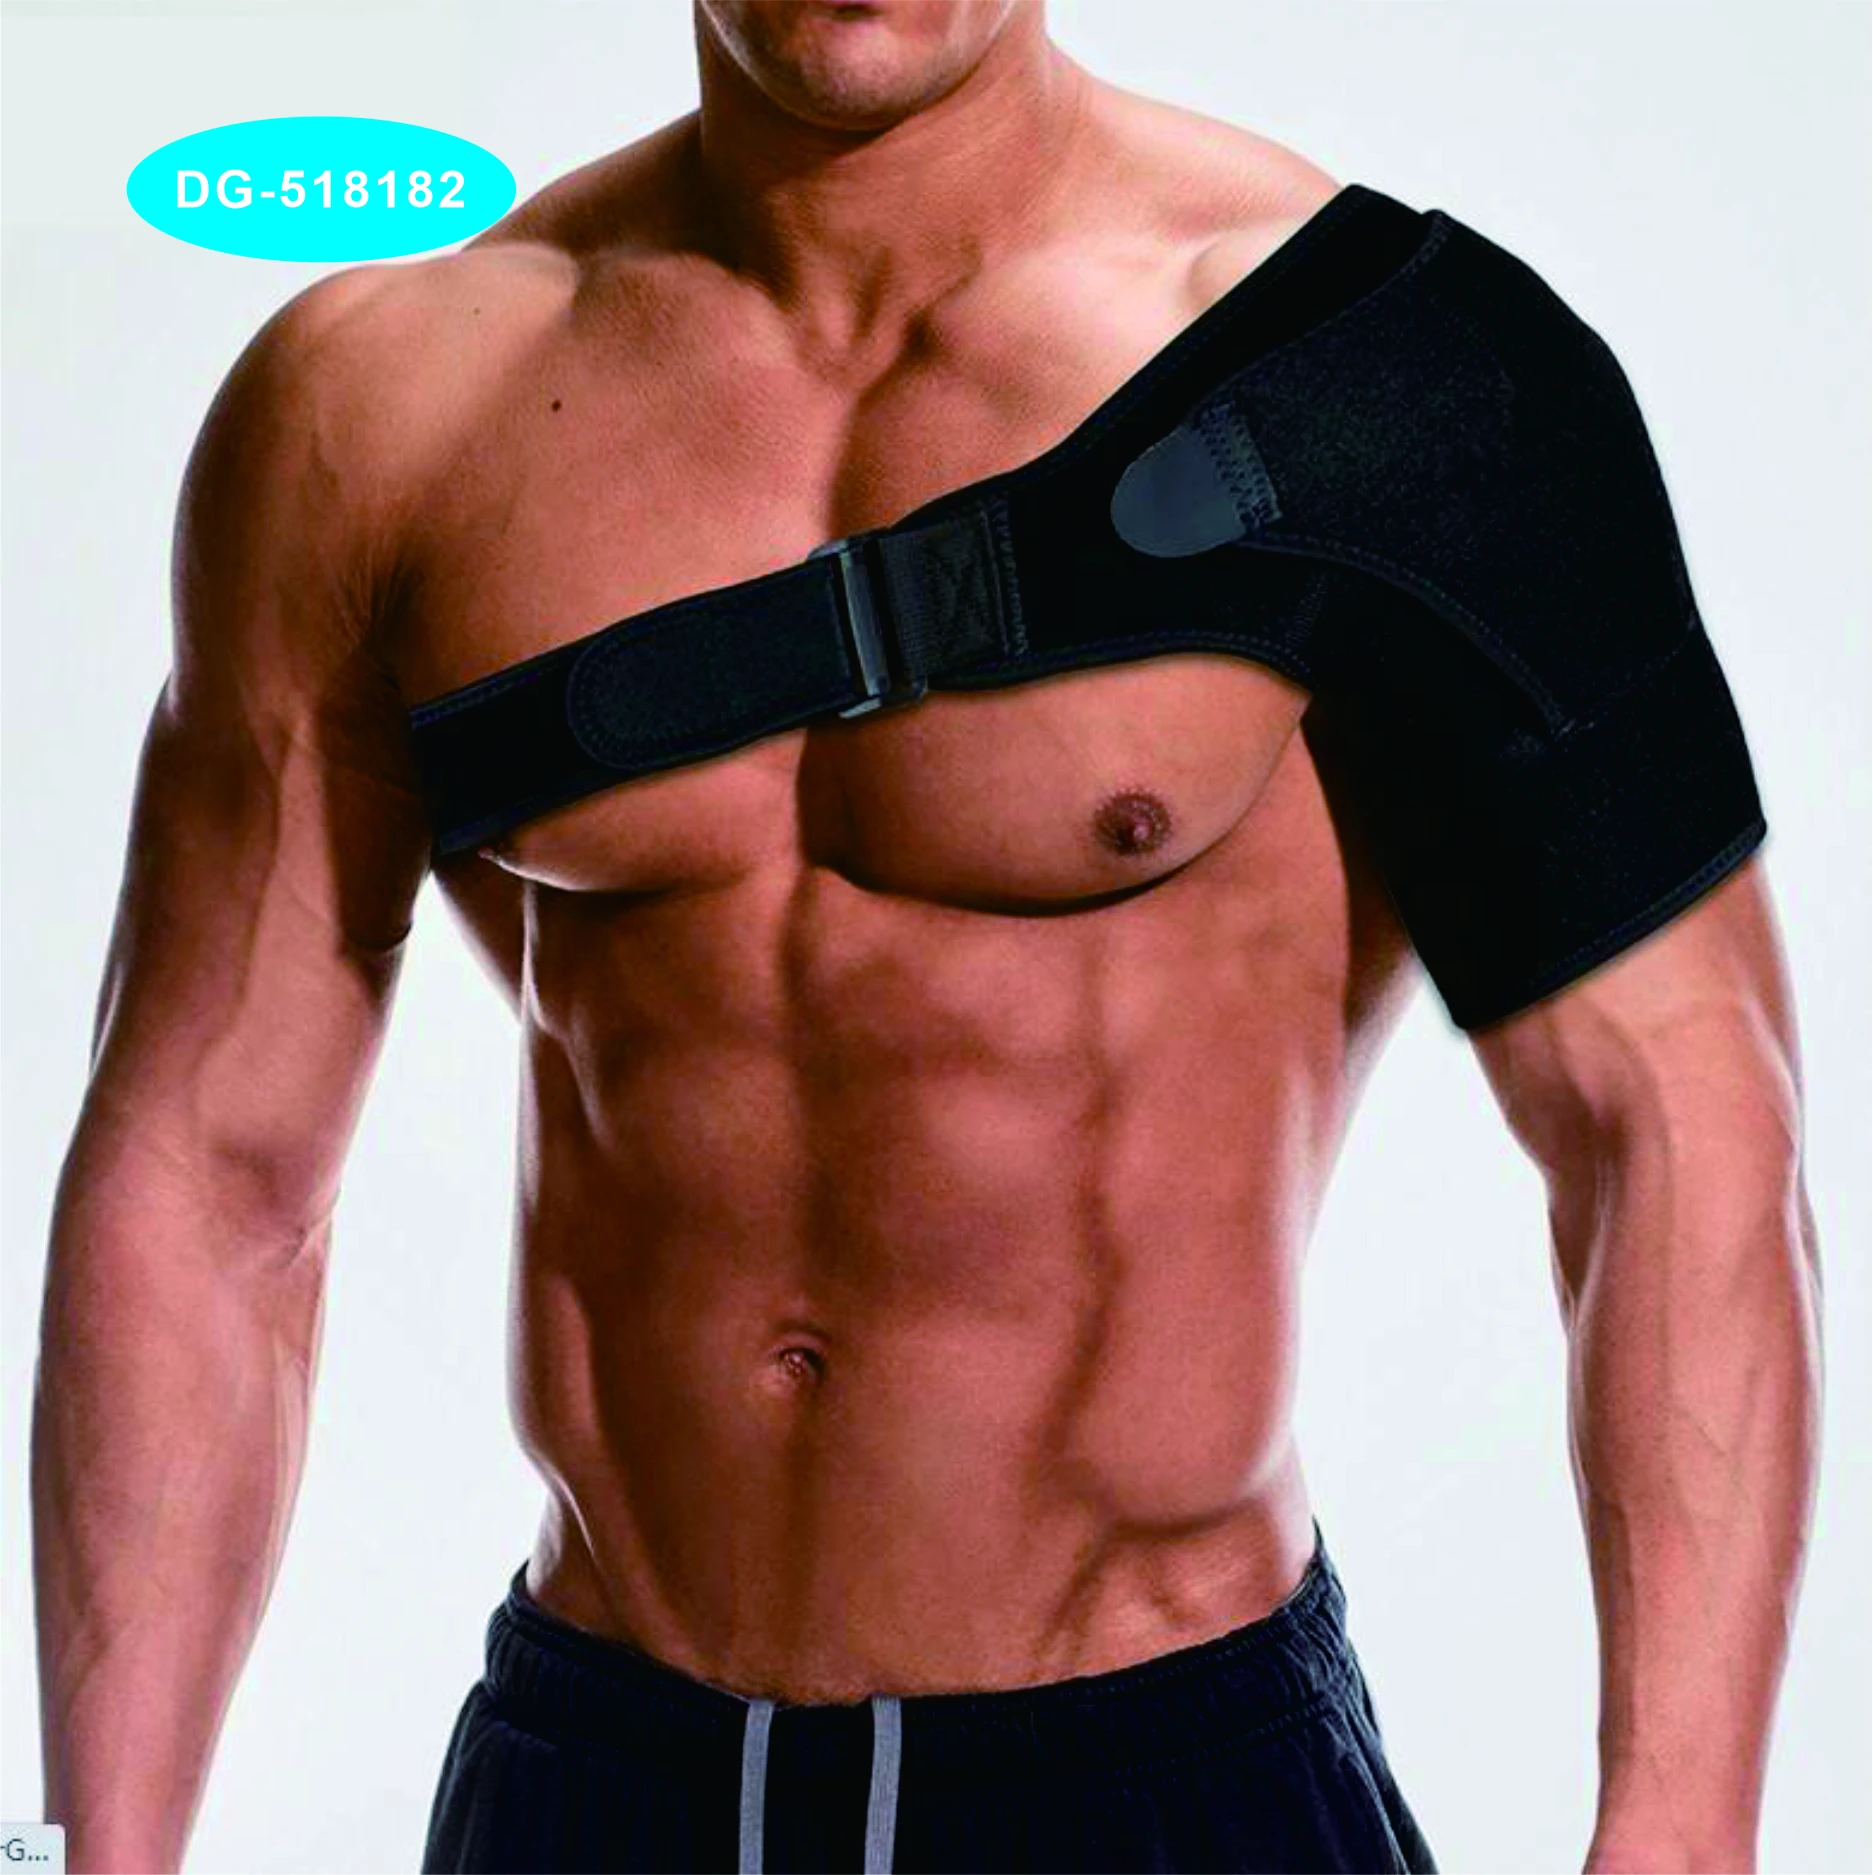 

Adjustable Breathable Neoprene Rotator Cuff Shoulder Support Brace for shoulder protection and recovery, Black